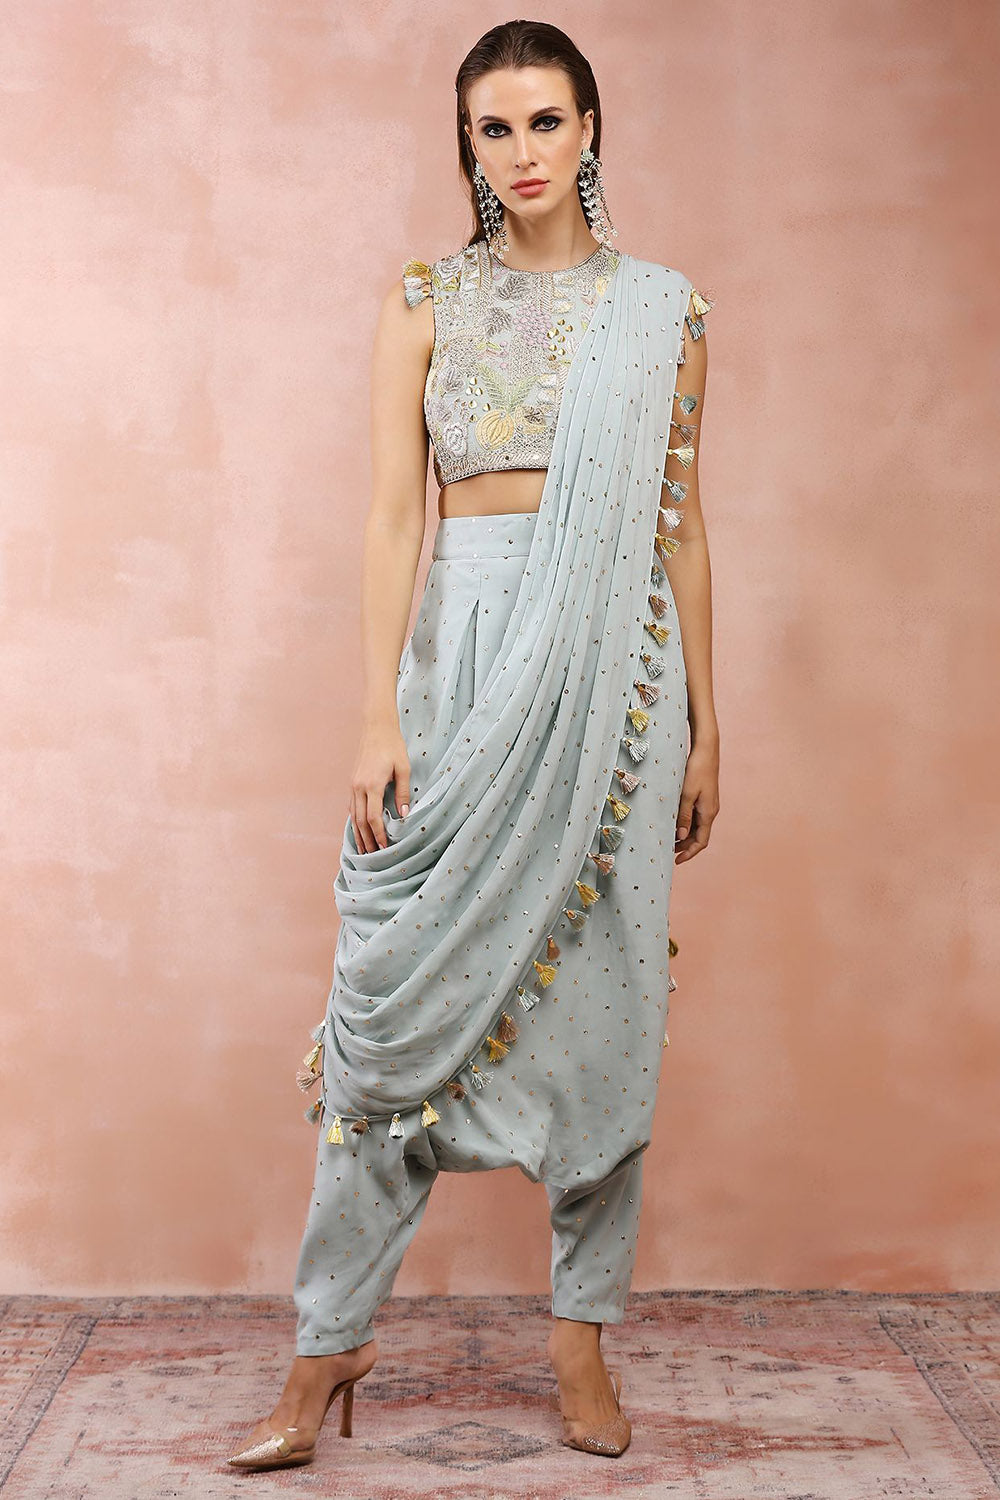 Powder Blue Choli And Low Crotch Pant With Attached Drape